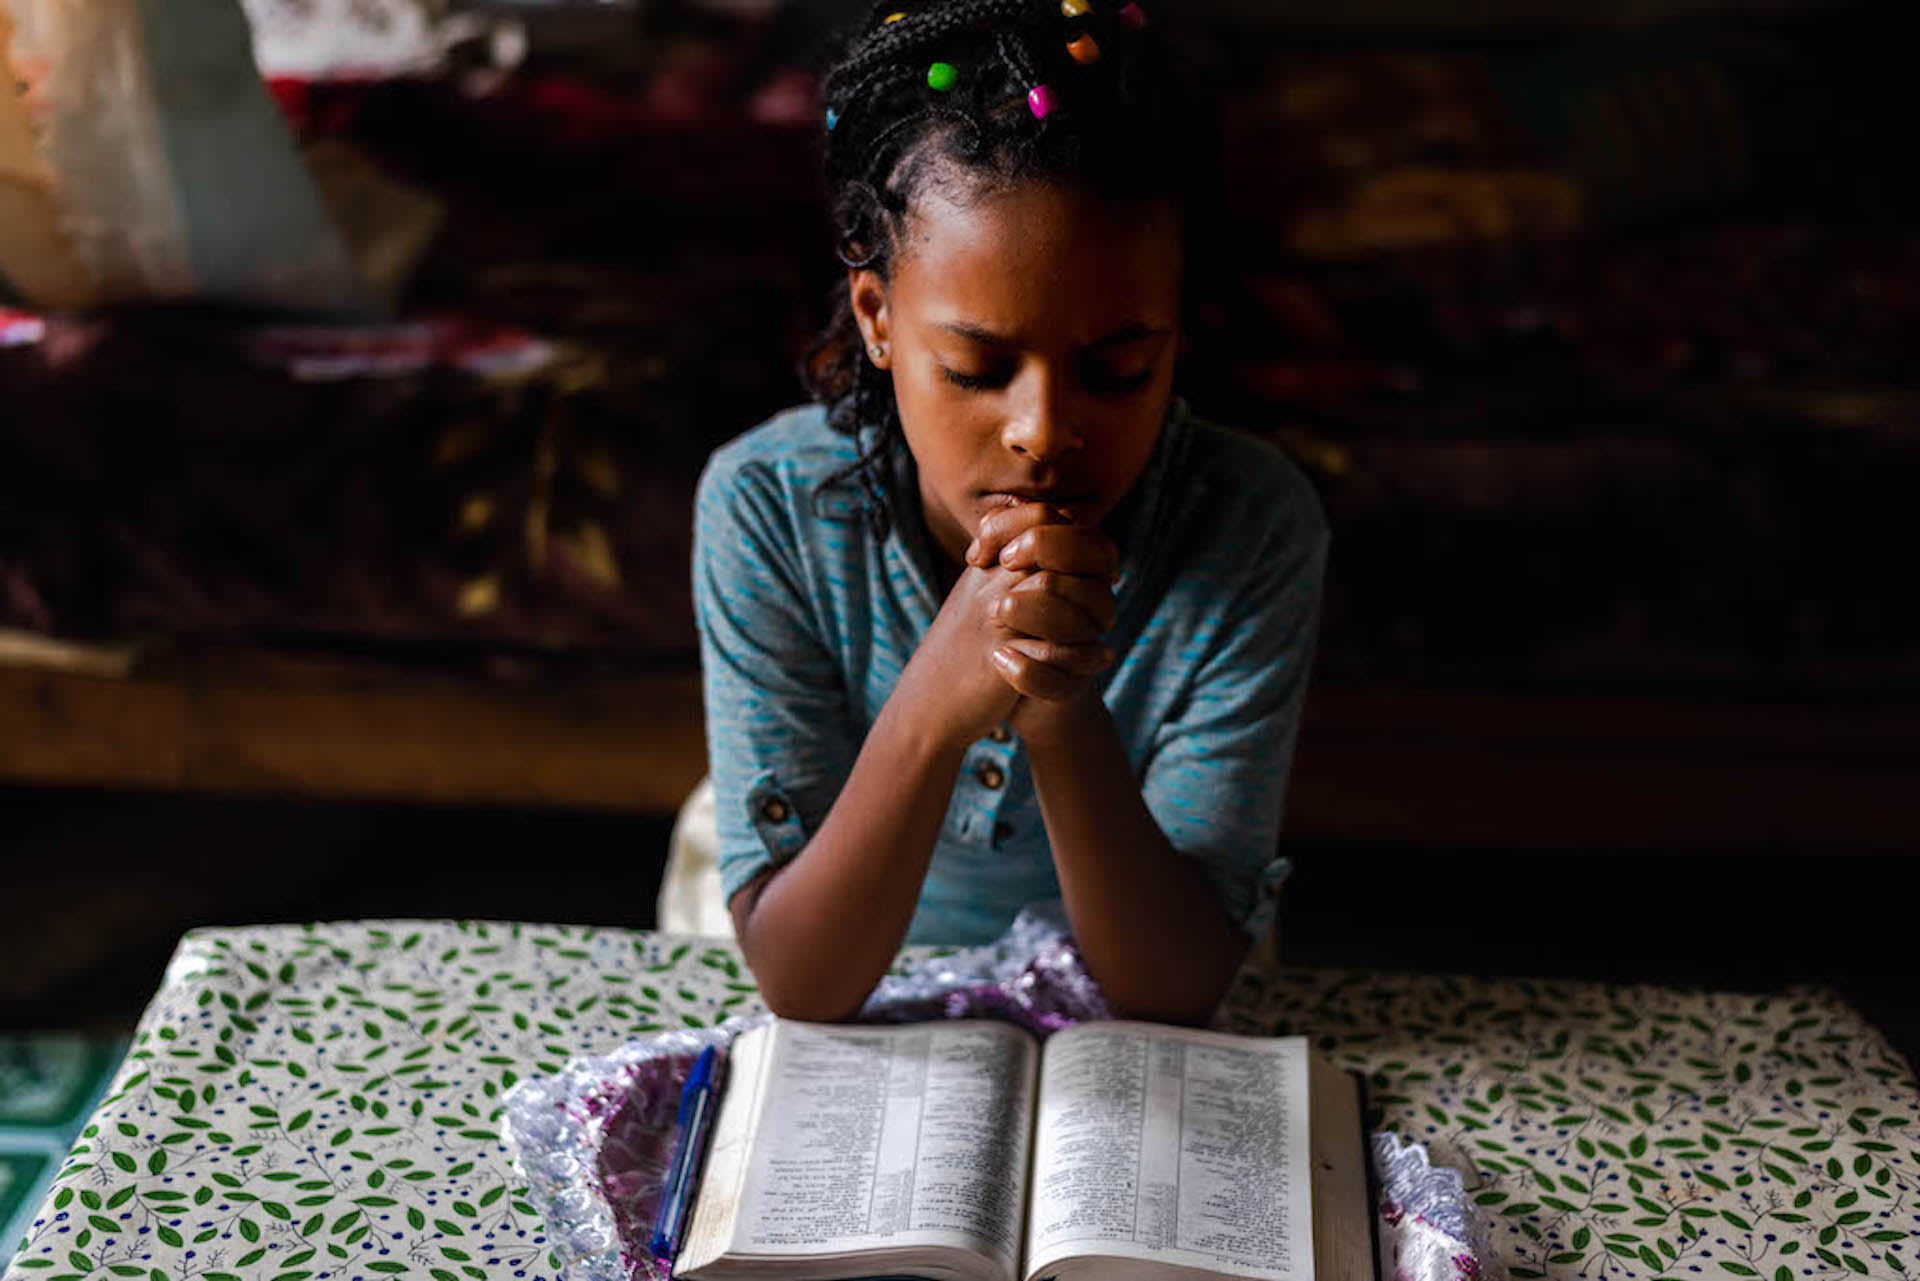 An Ethiopian girl praying with a Bible open on the table in front of her.